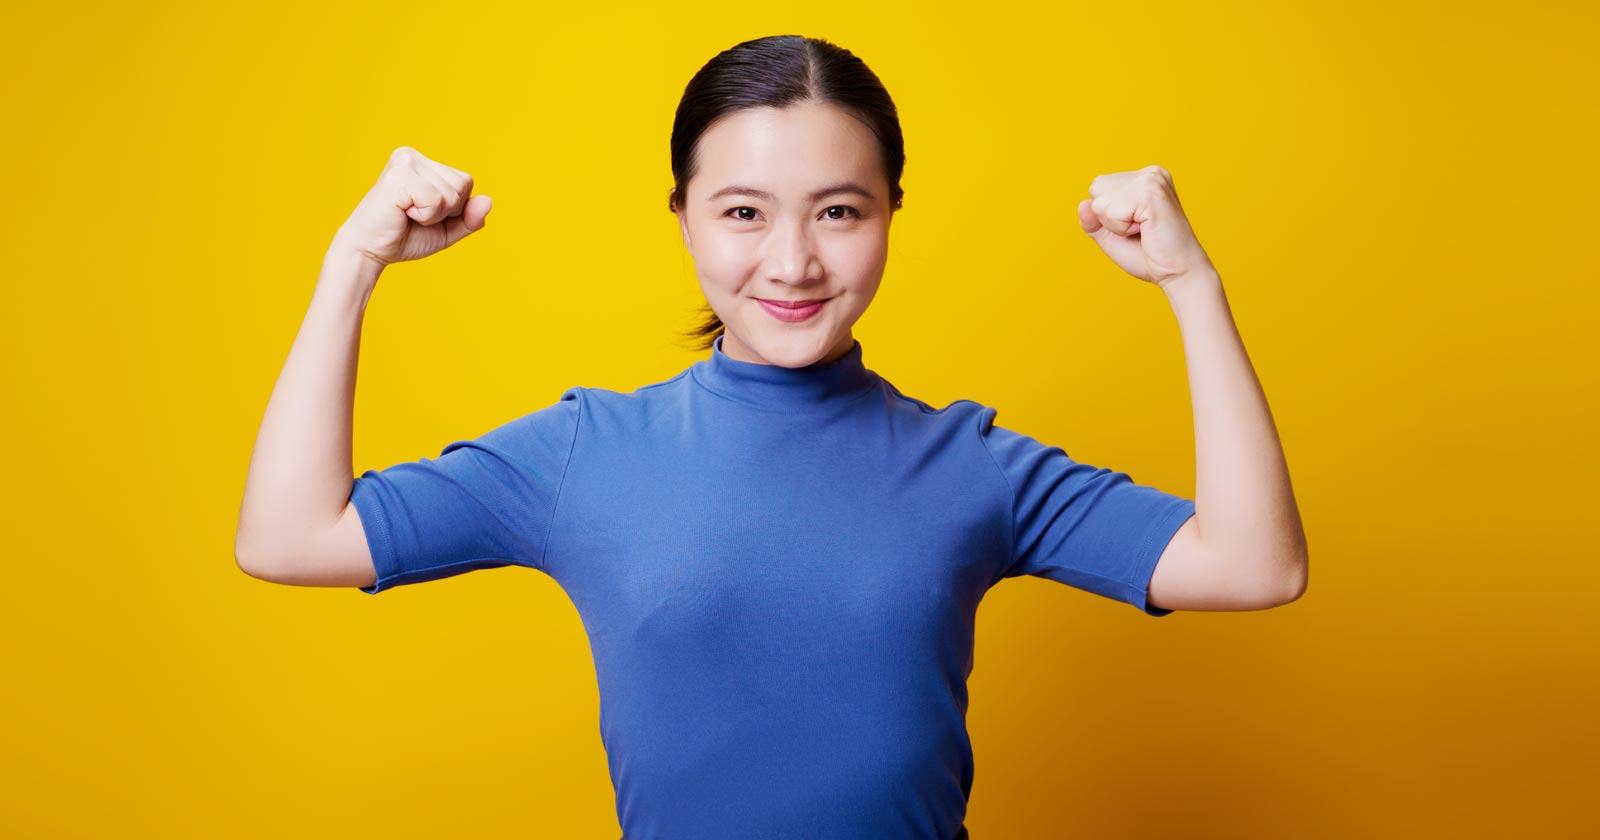 Image of woman flexing muscles as an illustration of an SEO gaining knowledge and power